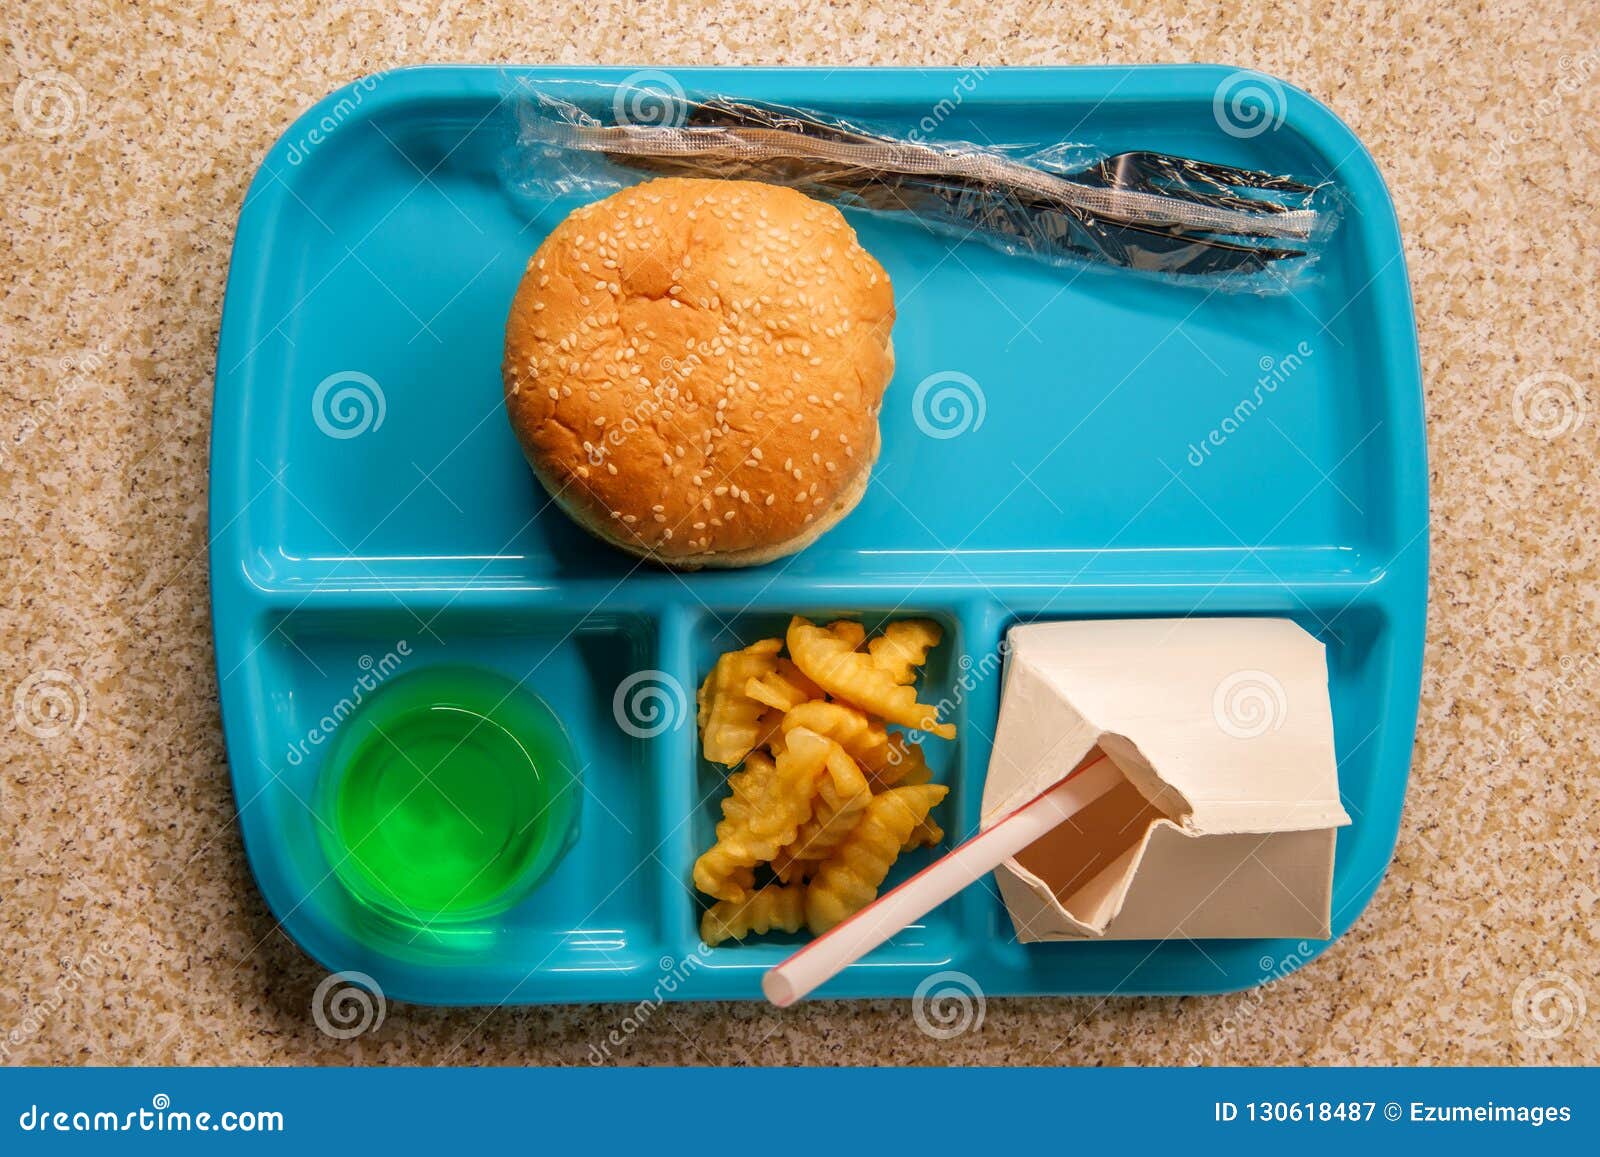 School Lunch Tray Cheeseburger Stock Image - Image of diet, blue: 130618487